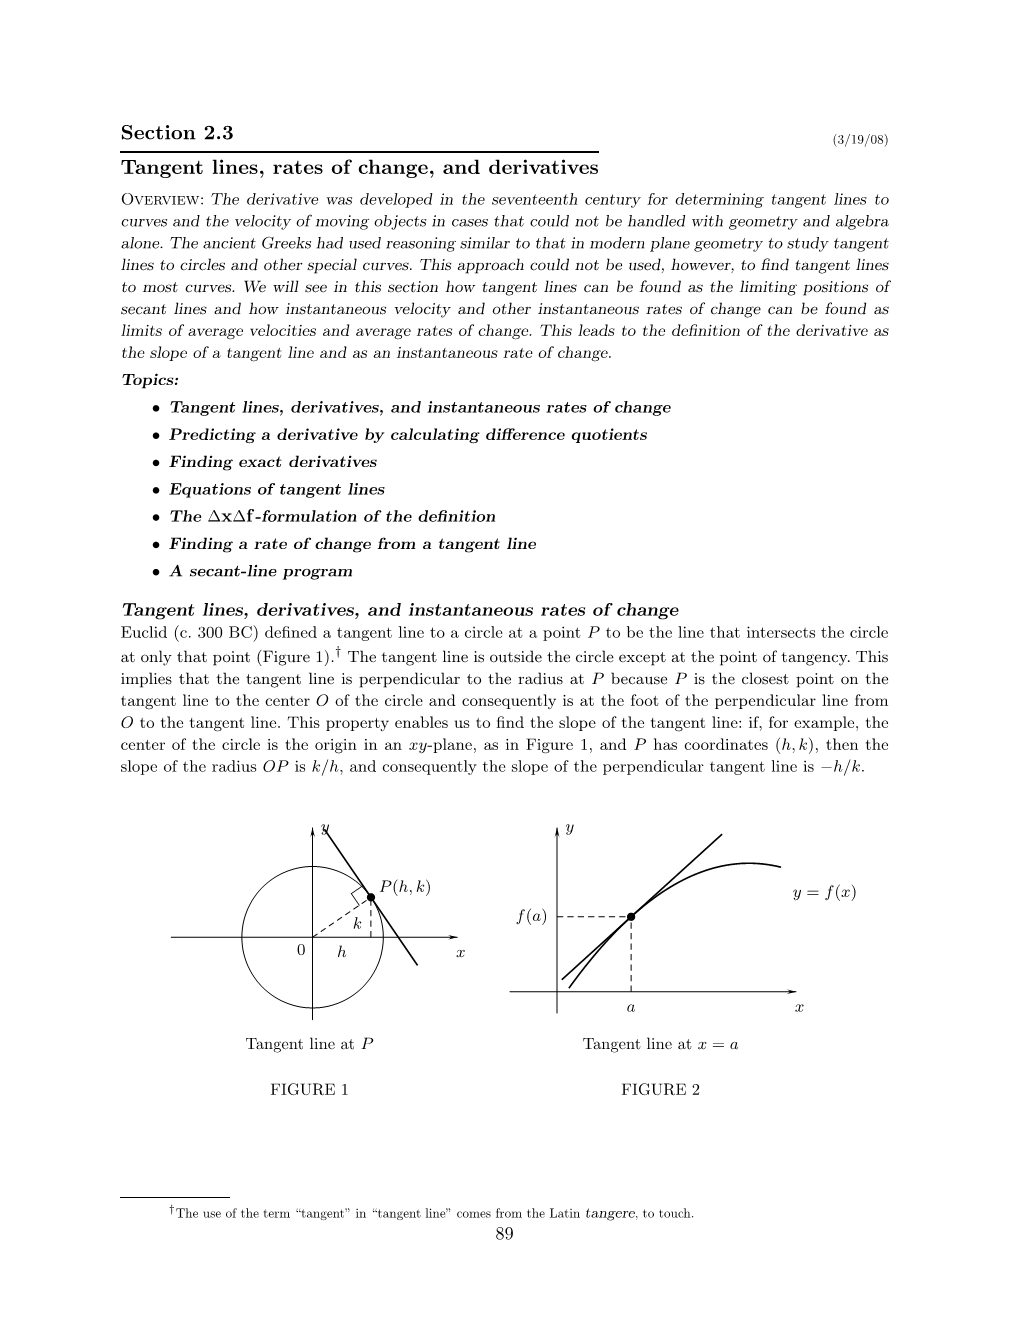 Section 2.3 Tangent Lines, Rates of Change, and Derivatives